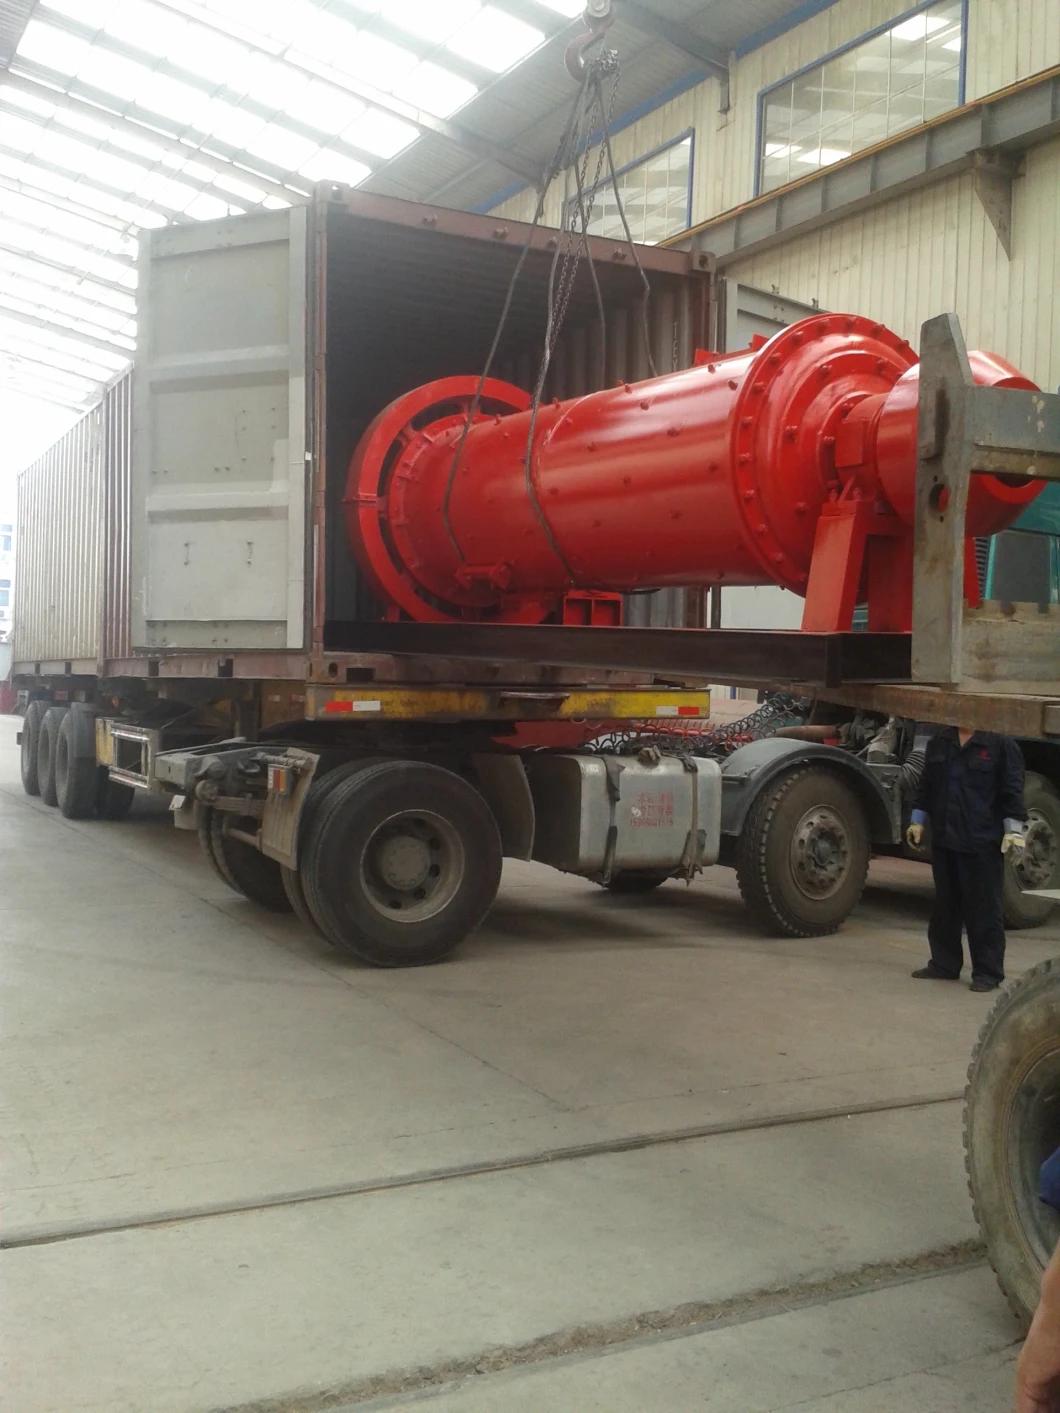 Mini Ball Mill 1 Ton Per Hour/Grinding Ball Mill Cement Gold Processing Plant in Africa